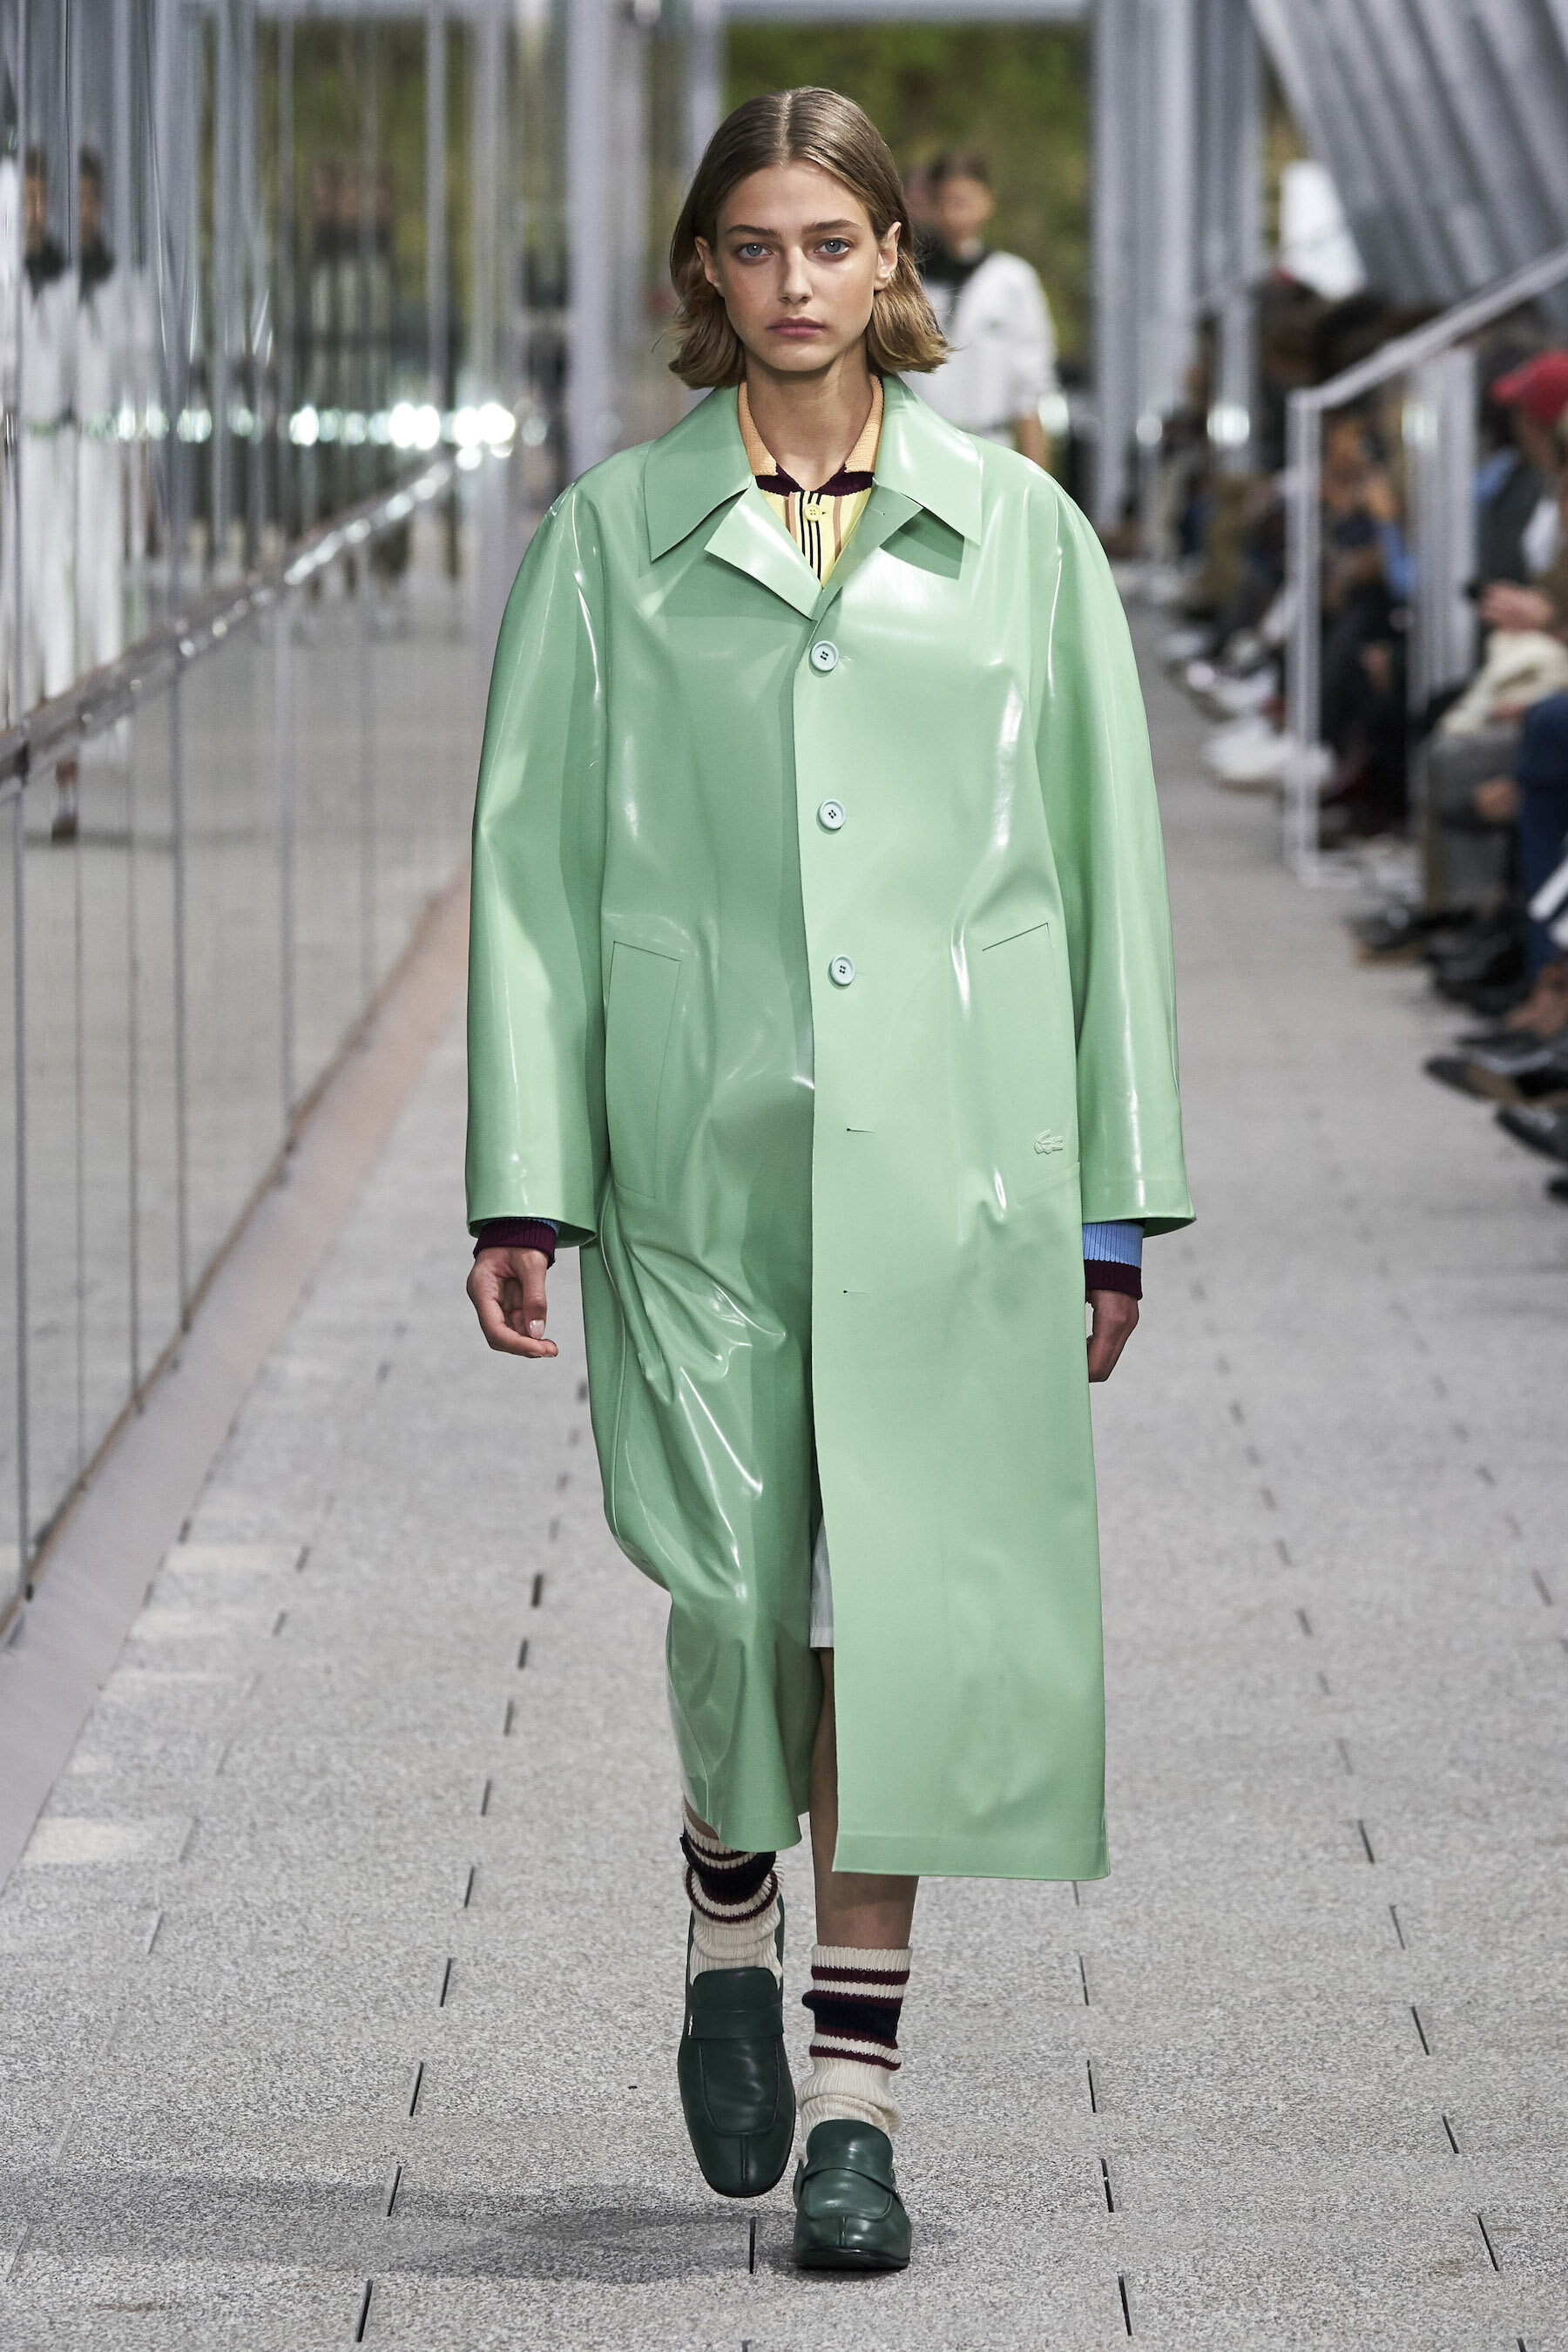 Lacoste SS20_LOOK 38 by Alessandro Lucioni  Imaxtree.com.jpg